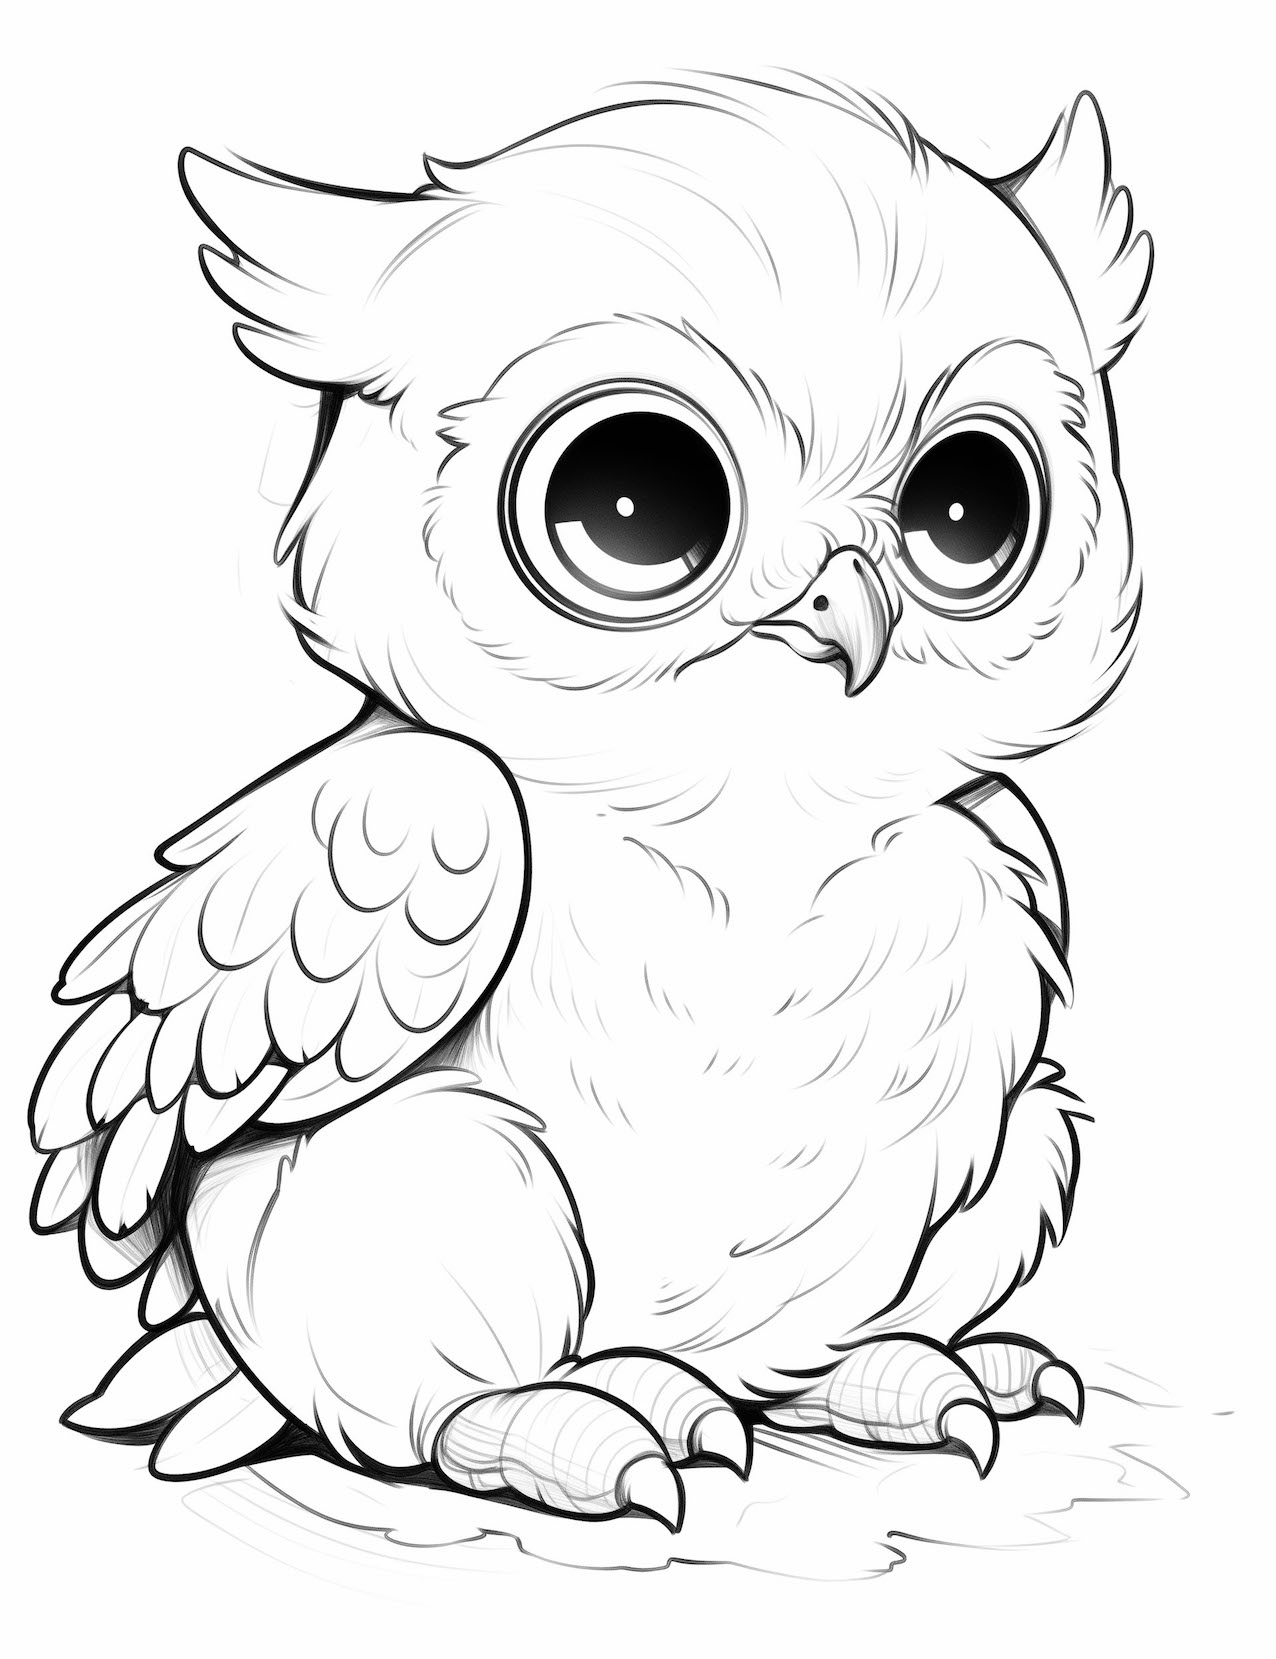 Fascinating owl coloring pages free printable